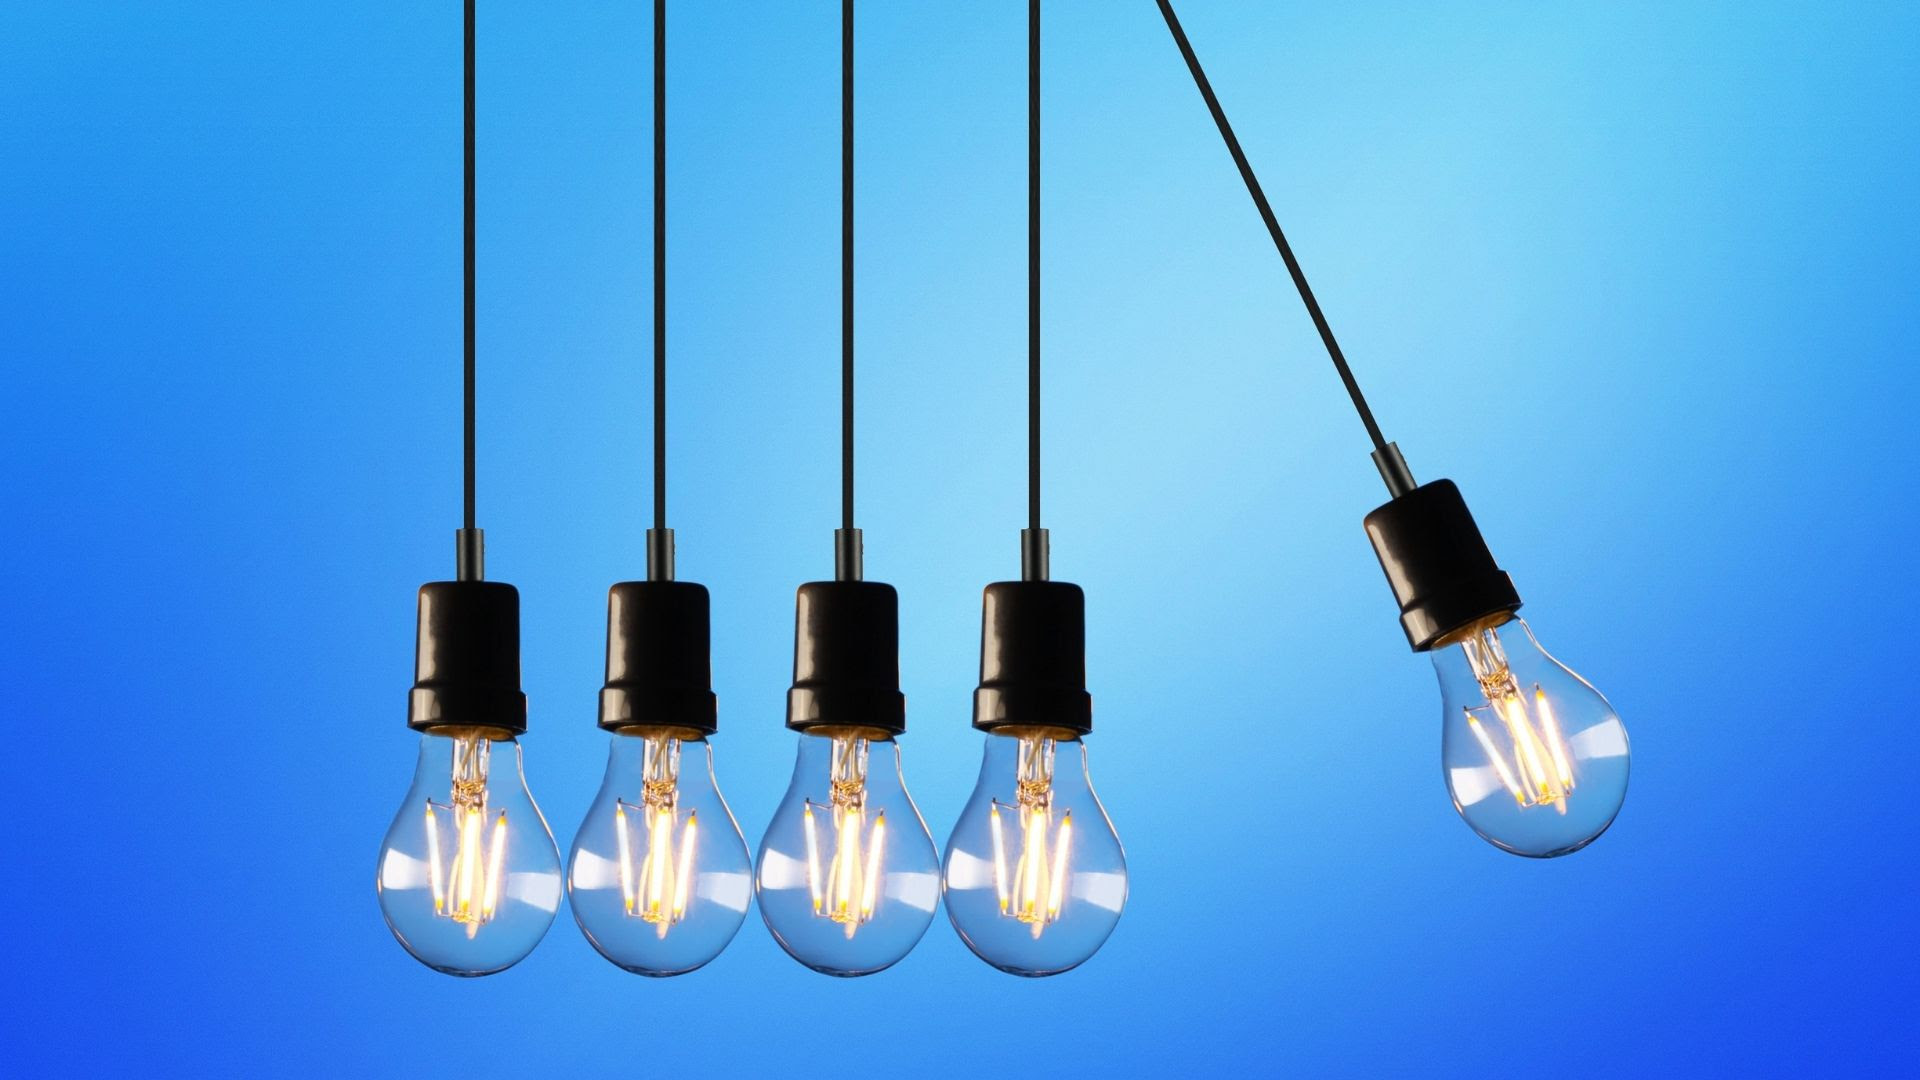 My Electrical Expert Offers a Range of Electrical Services Backed By Years of Industry Expertise